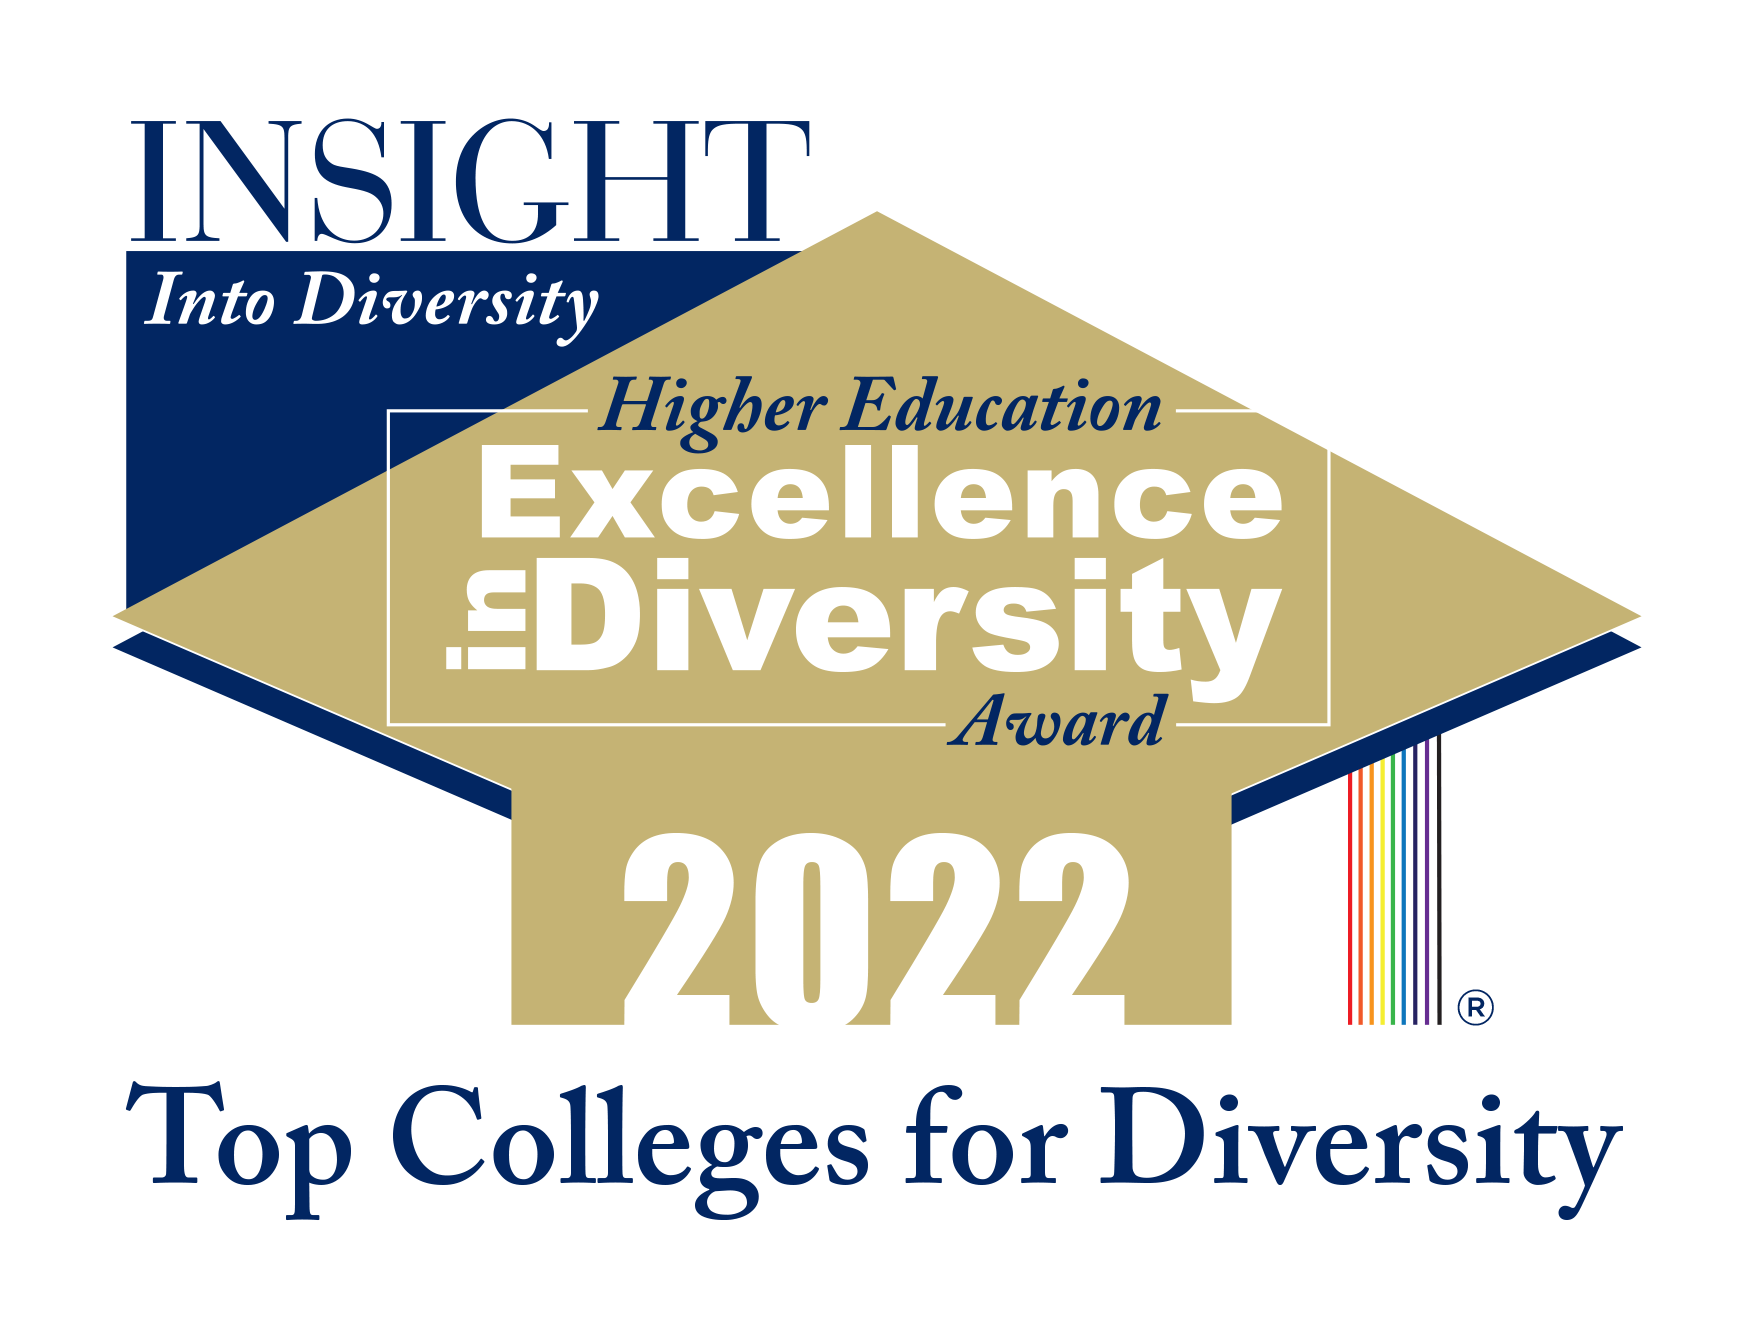 Insight Into Diversity Higher Education Excellence in Diversity Award 2022 Top Colleges for Diversity